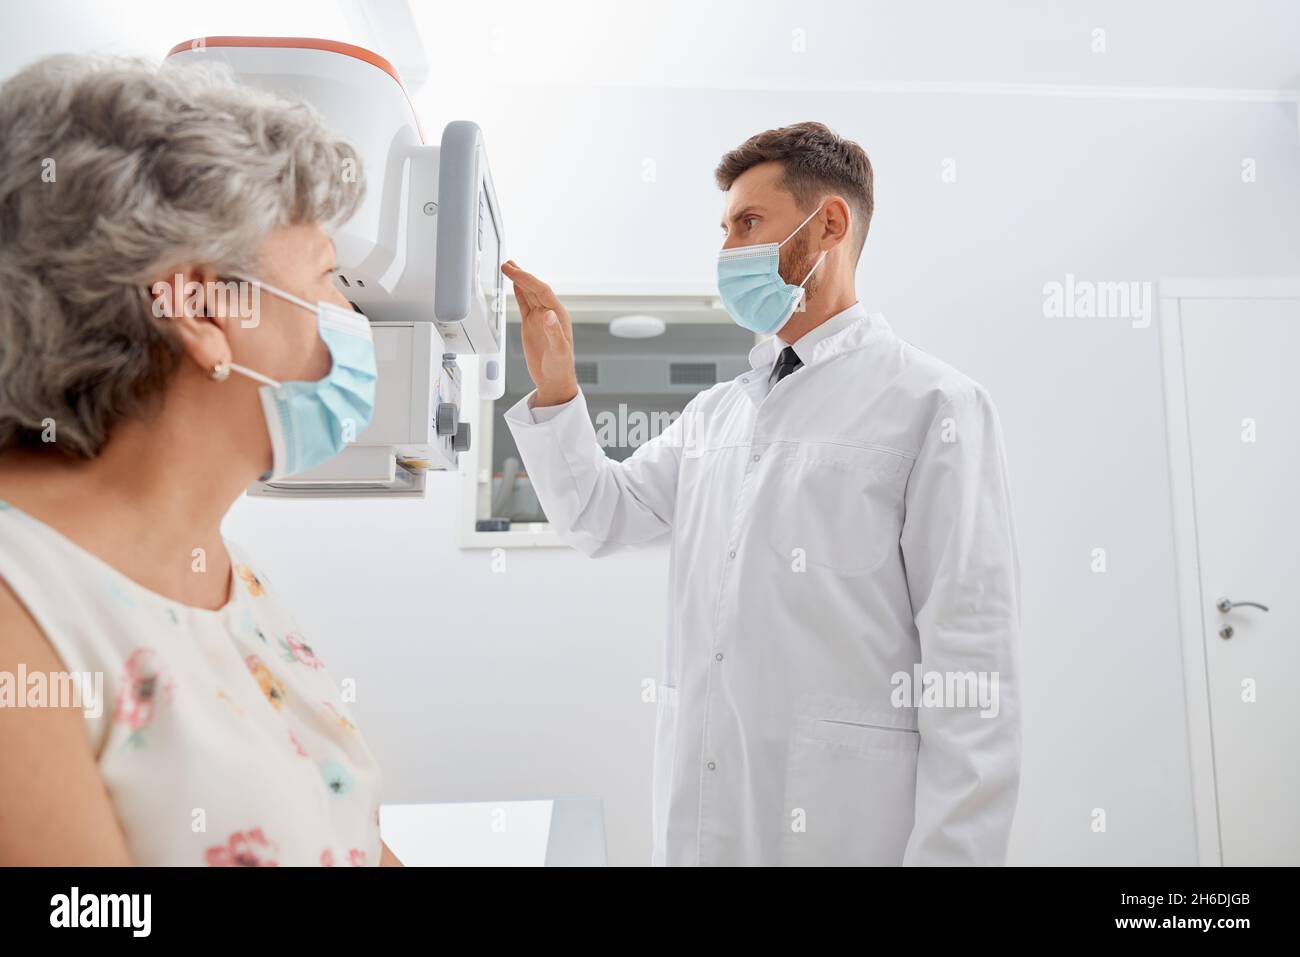 Side view professional radiologist touching screen of modern equipment starting scanning process. Old grey female patient waiting, examine health in modern clinic. Concept of medicine. Stock Photo